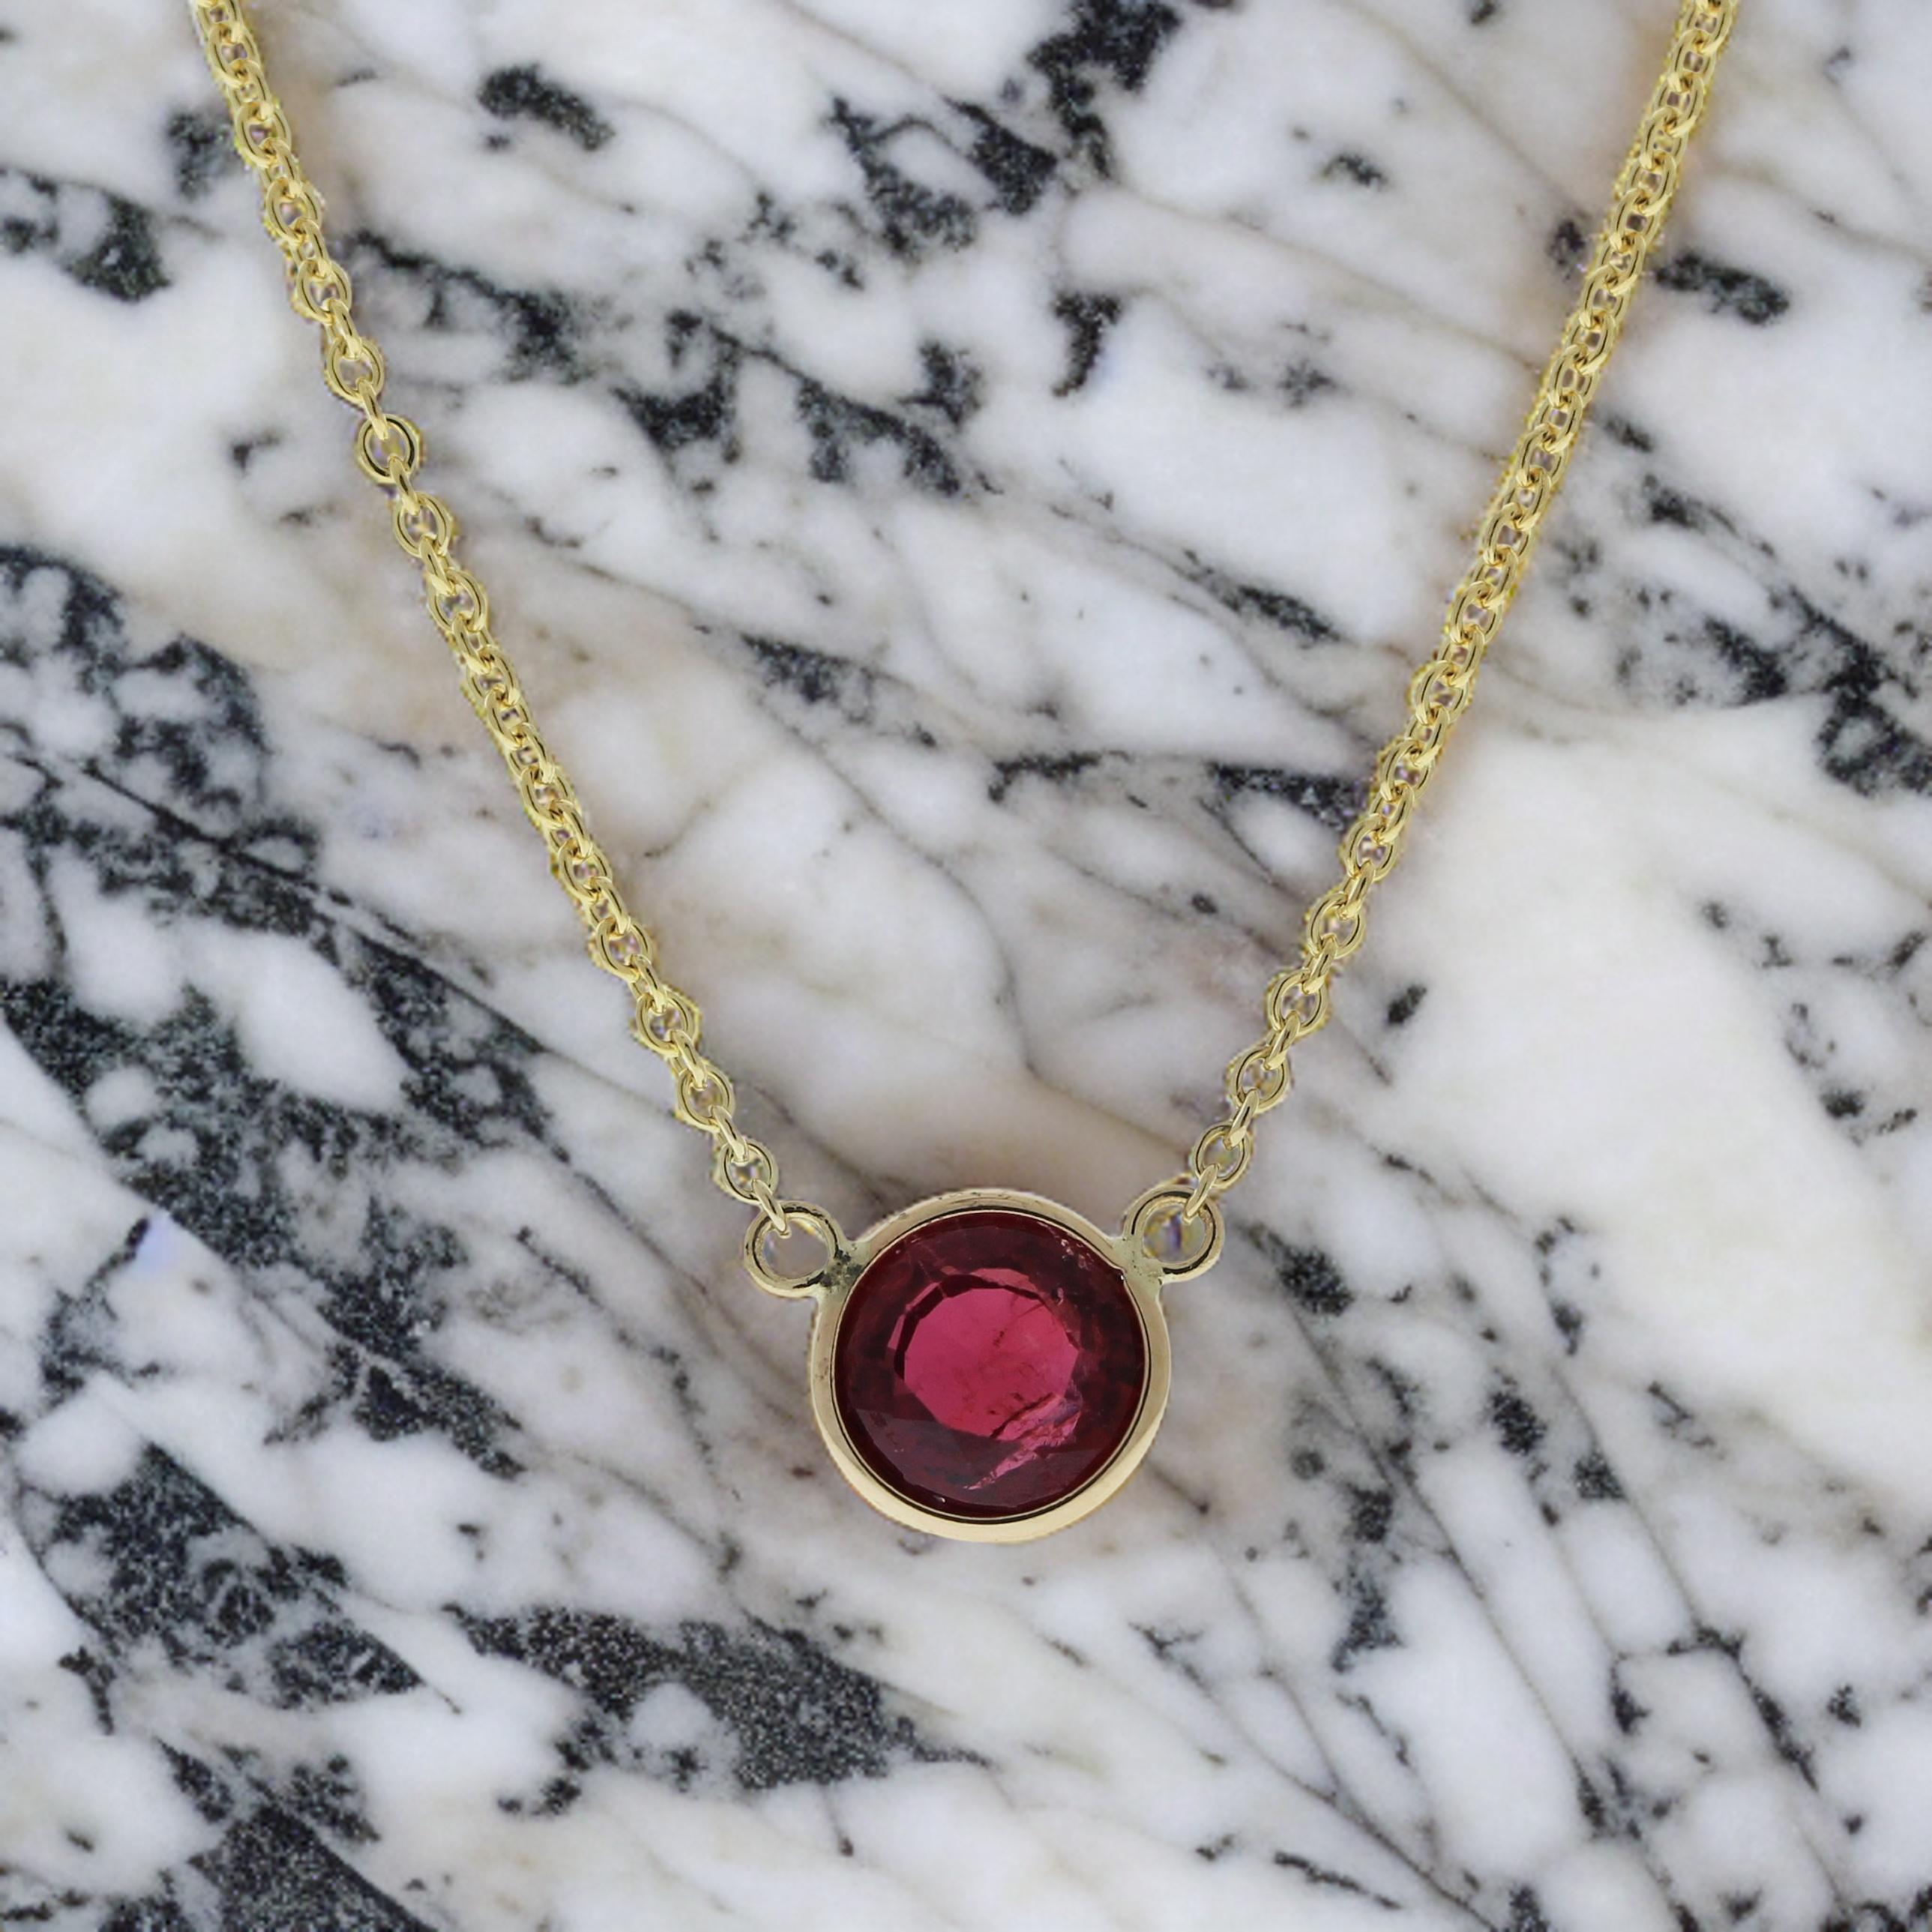 The necklace features a 1.14-carat round-cut ruby set in a 14 karat yellow gold pendant or setting. The round cut and the rich red color of the ruby against the yellow gold setting are likely to create an elegant and eye-catching fashion piece,